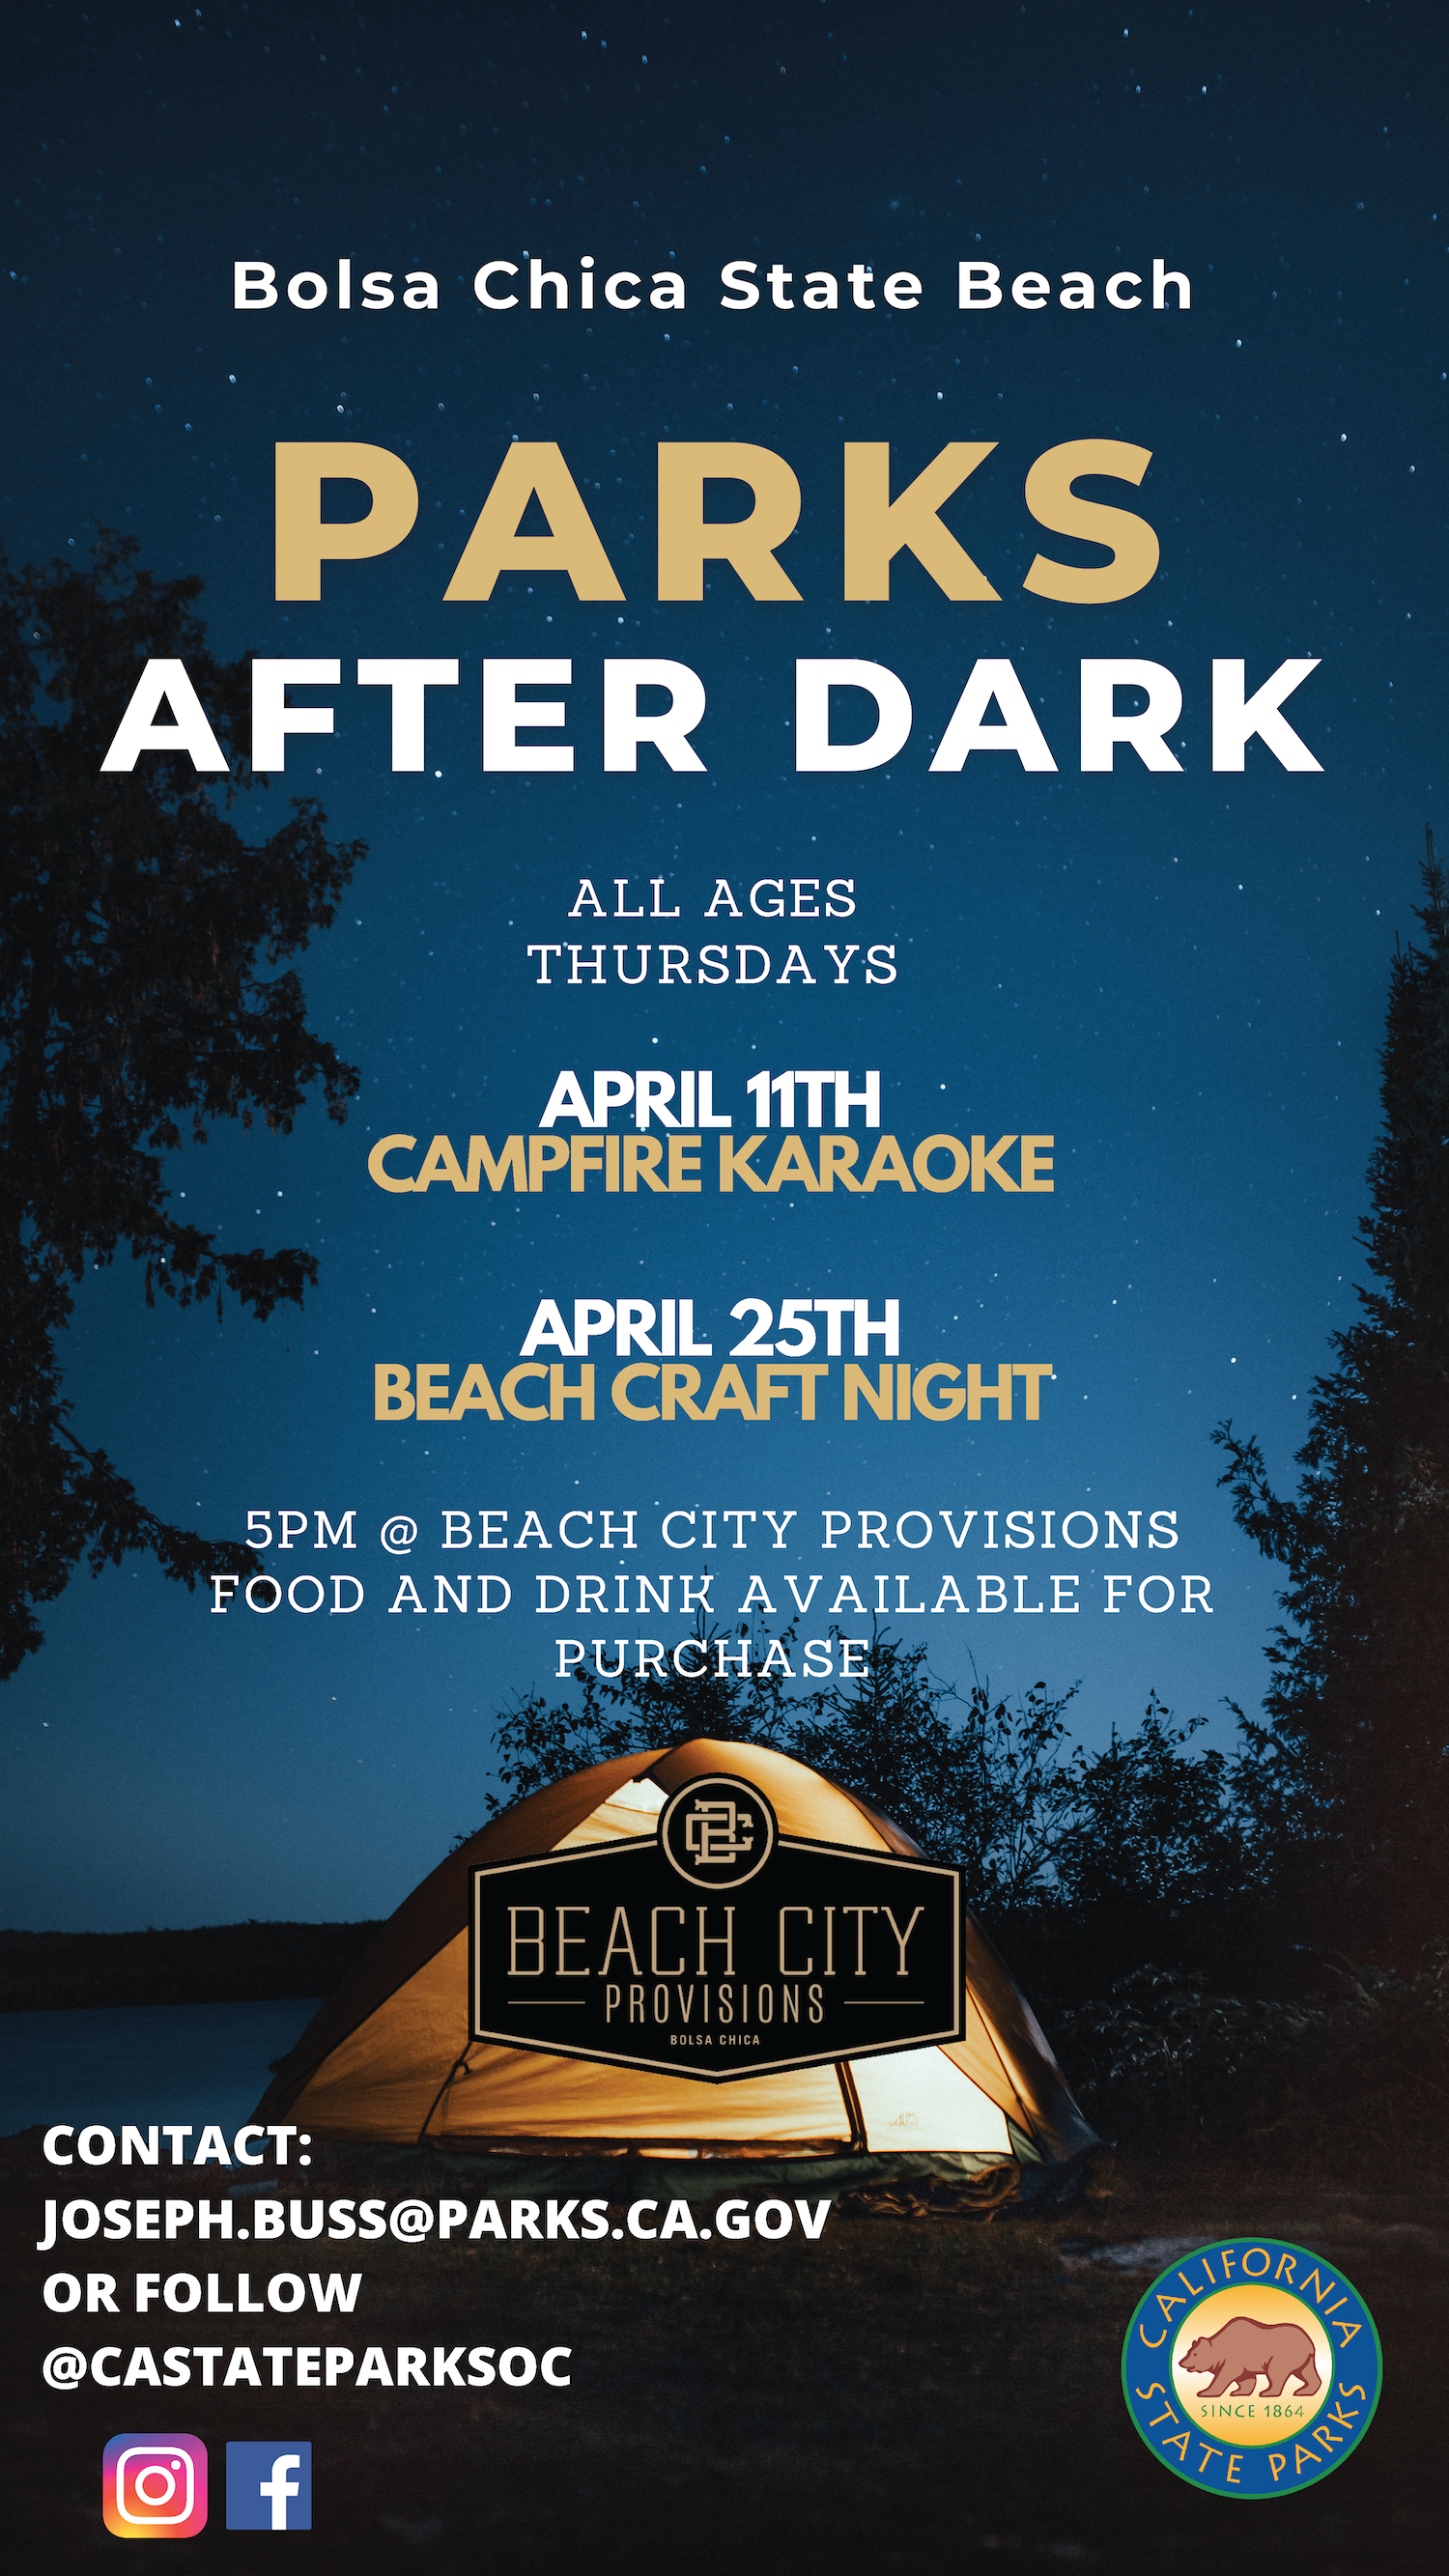 Flier features a illuminated camping tent under tall trees and a dark, star-lit sky. The flier reads